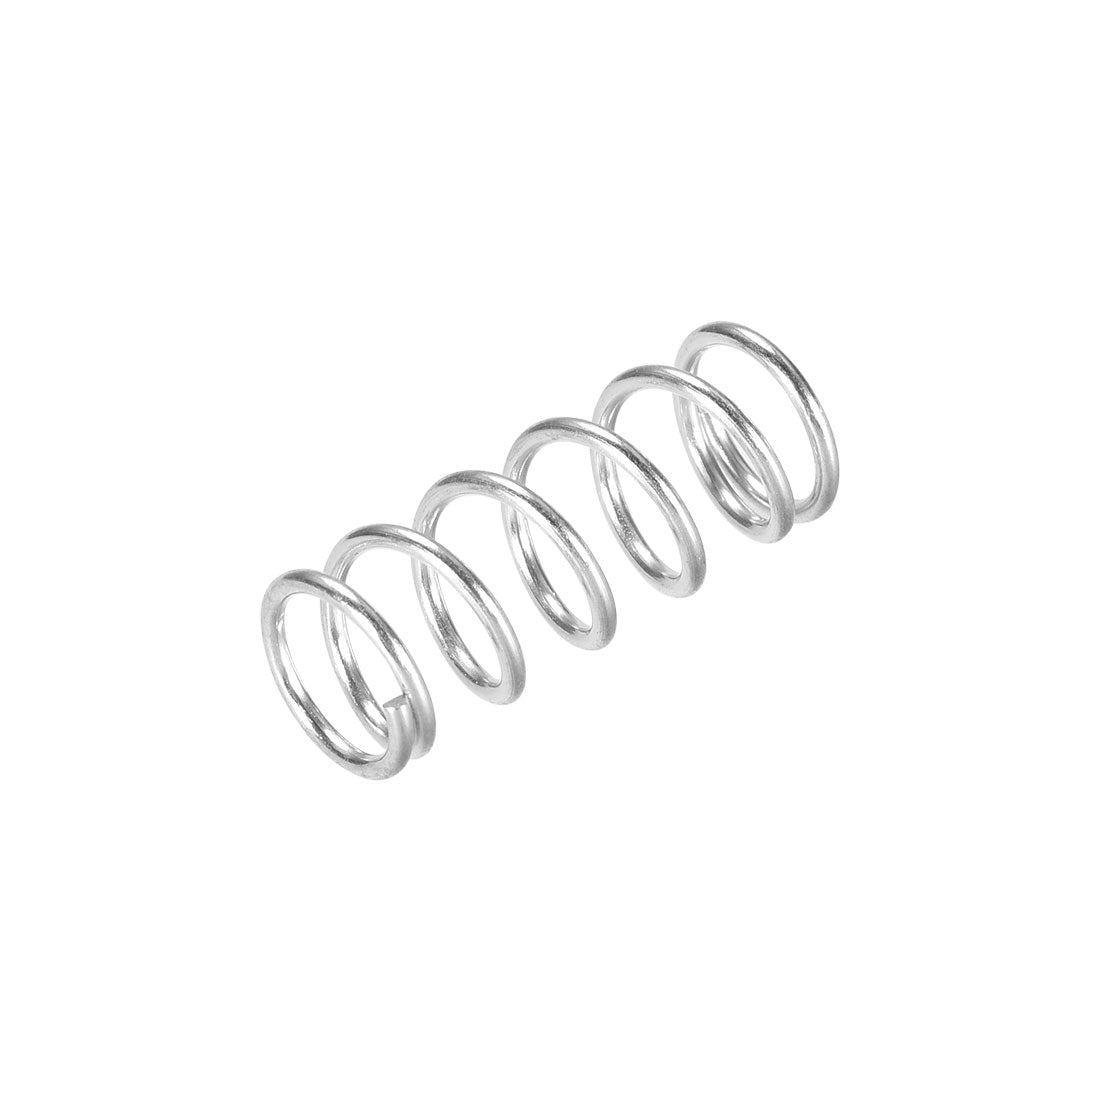 uxcell Uxcell Heated Bed Springs for 3D Printer Extruder Compression Spring, 9 x 22 mm 20pcs